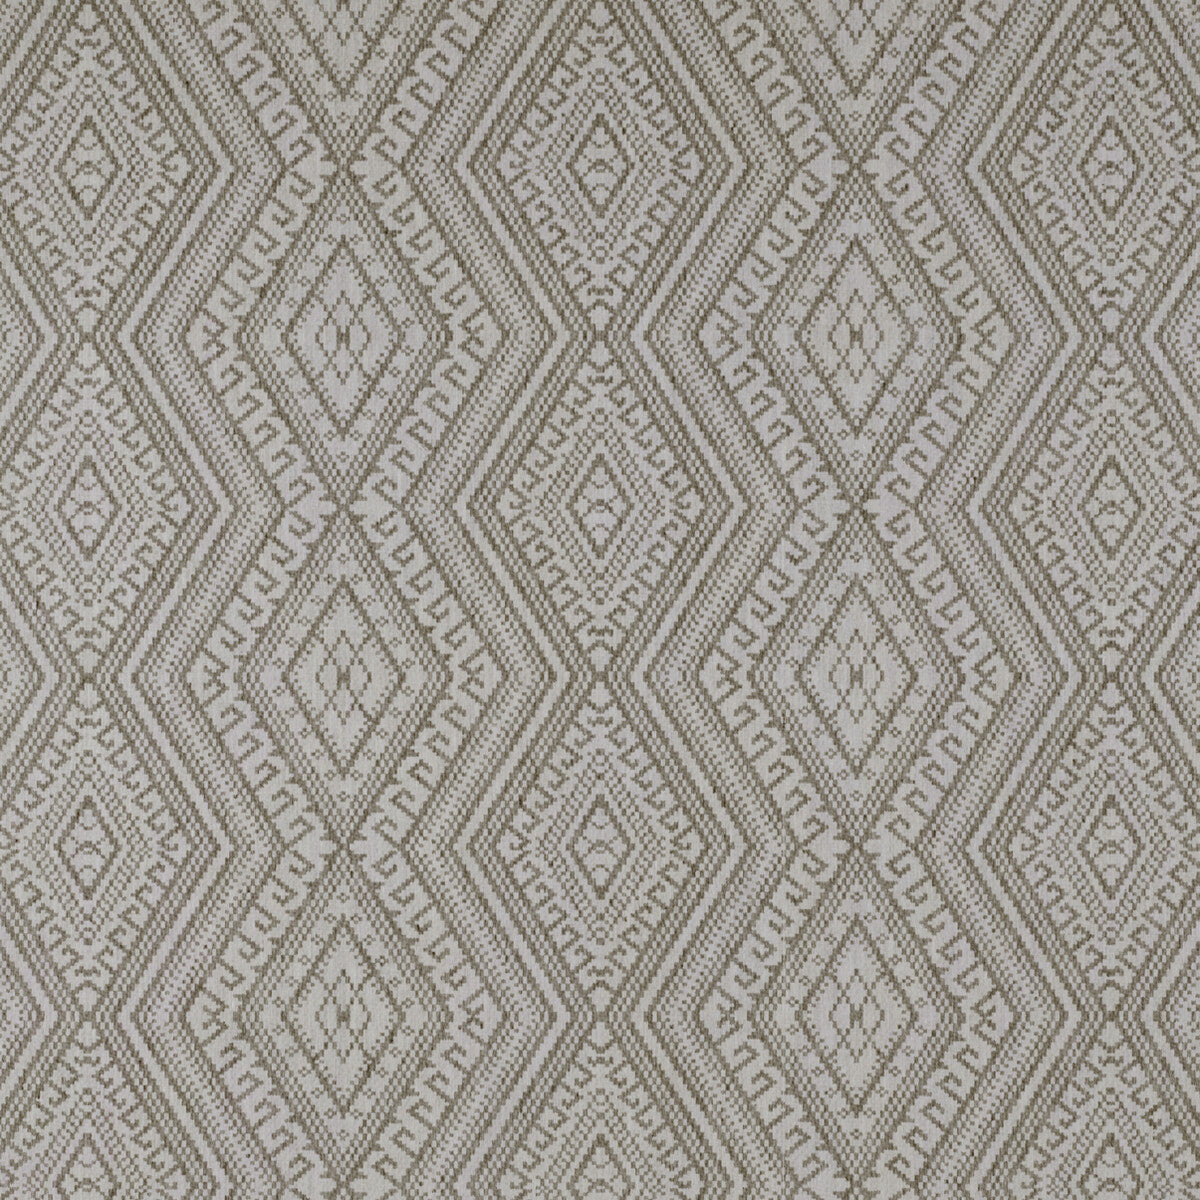 Estromboli fabric in tostado color - pattern GDT5313.003.0 - by Gaston y Daniela in the Tierras collection